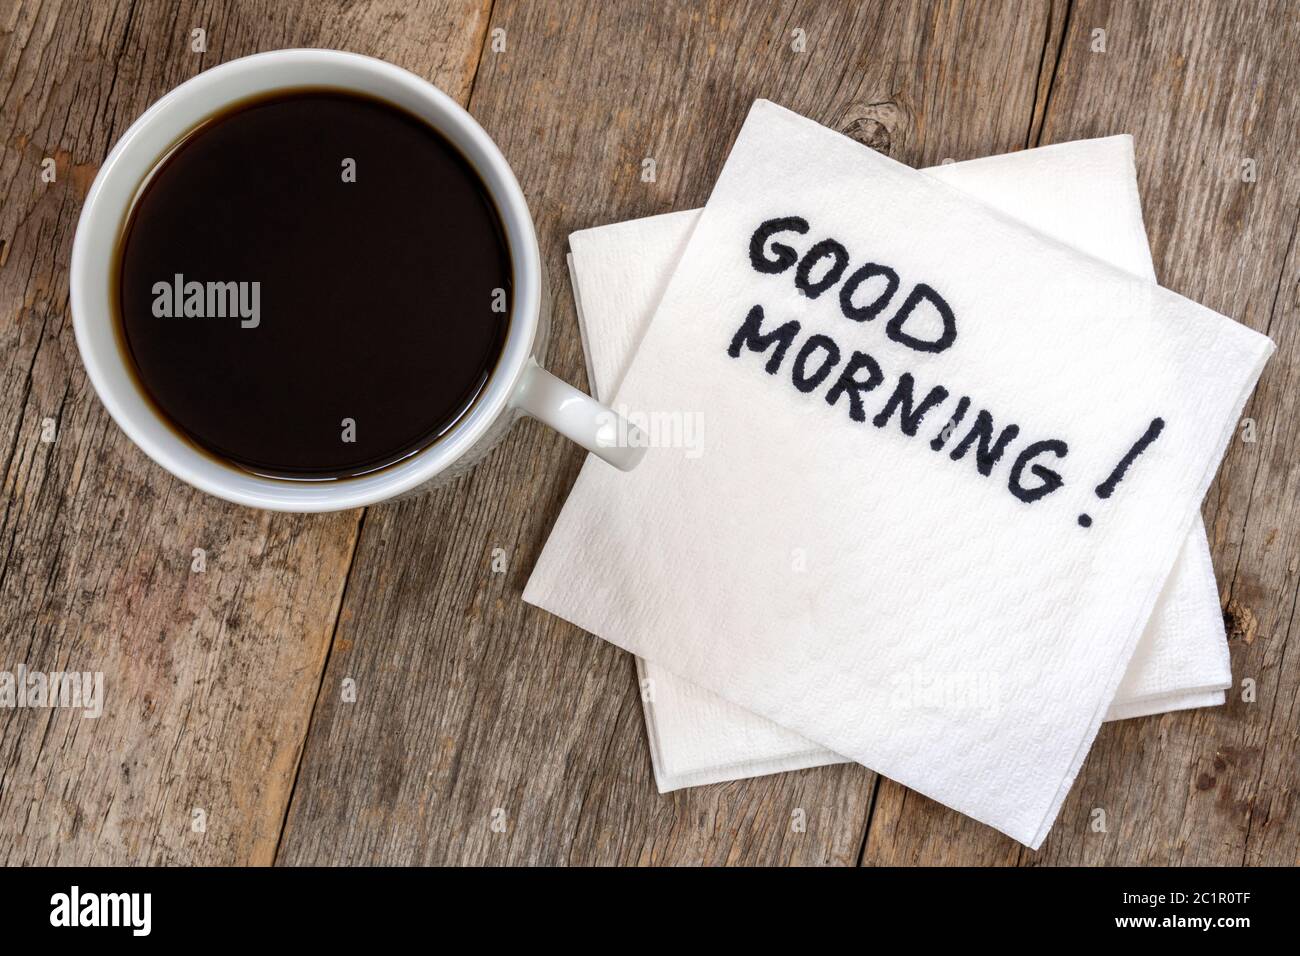 Good morning with coffee Stock Photo